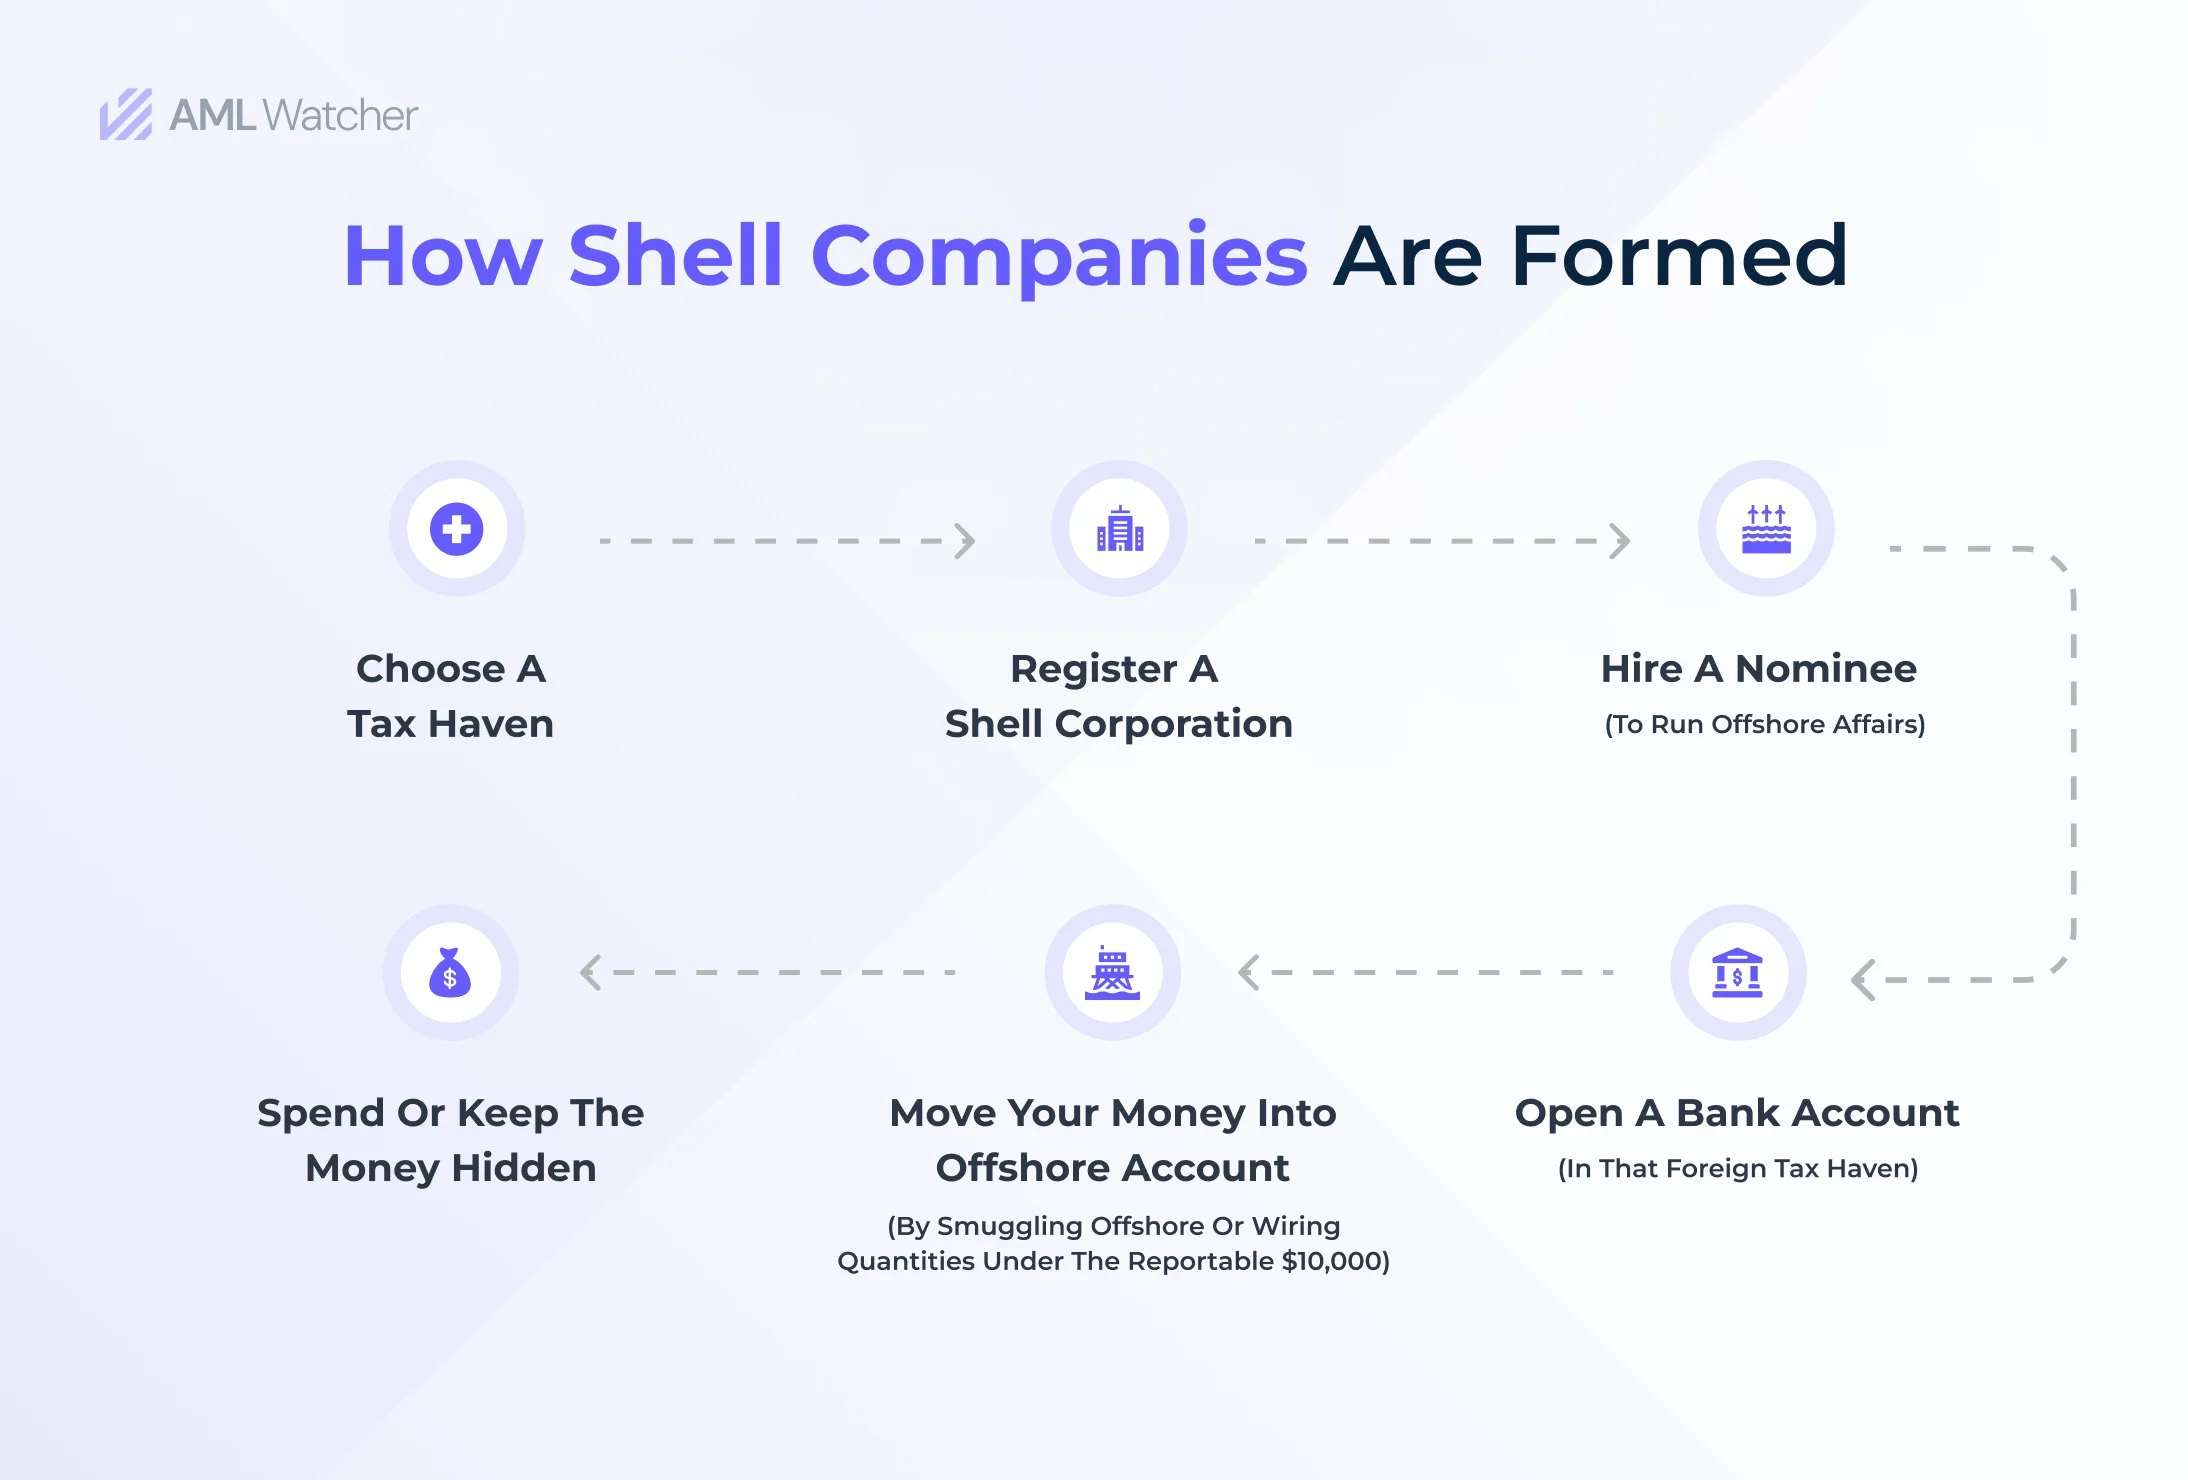 This image shows How Shell Companies are Formed.